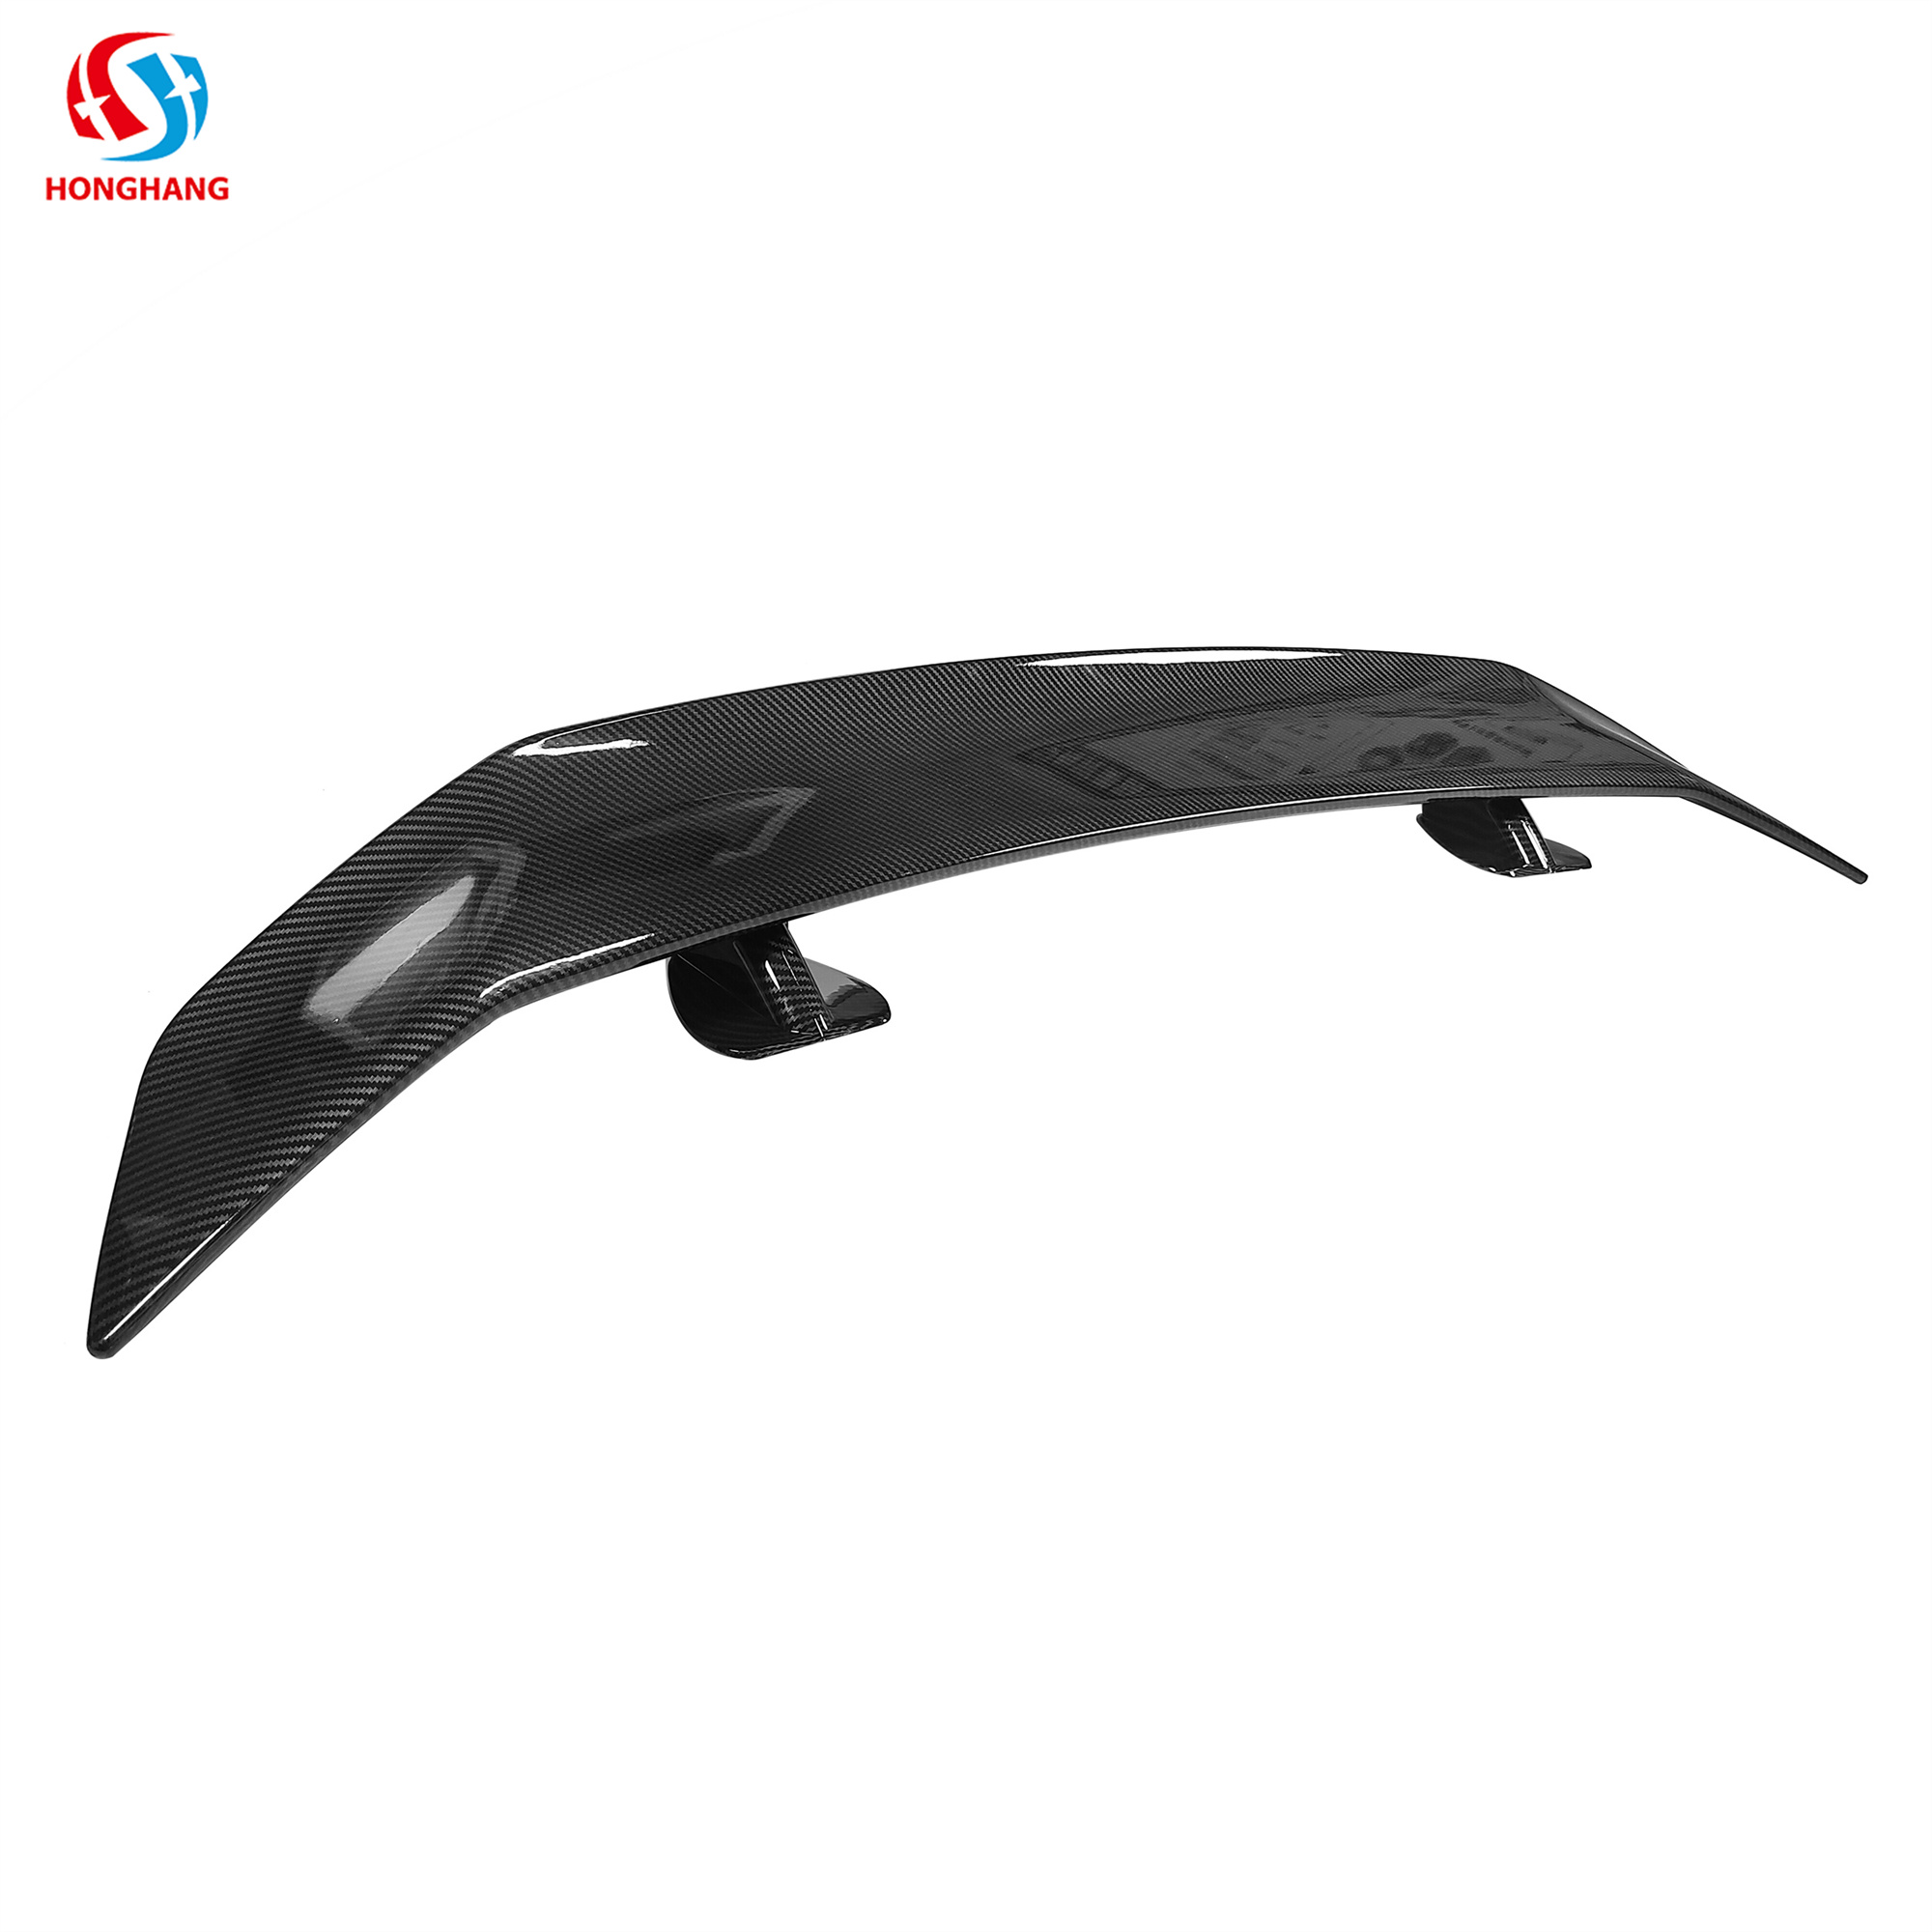 Type B Universal ABS Rear Wing Spoiler Rear Trunk Spoiler For All Cars Coupe 